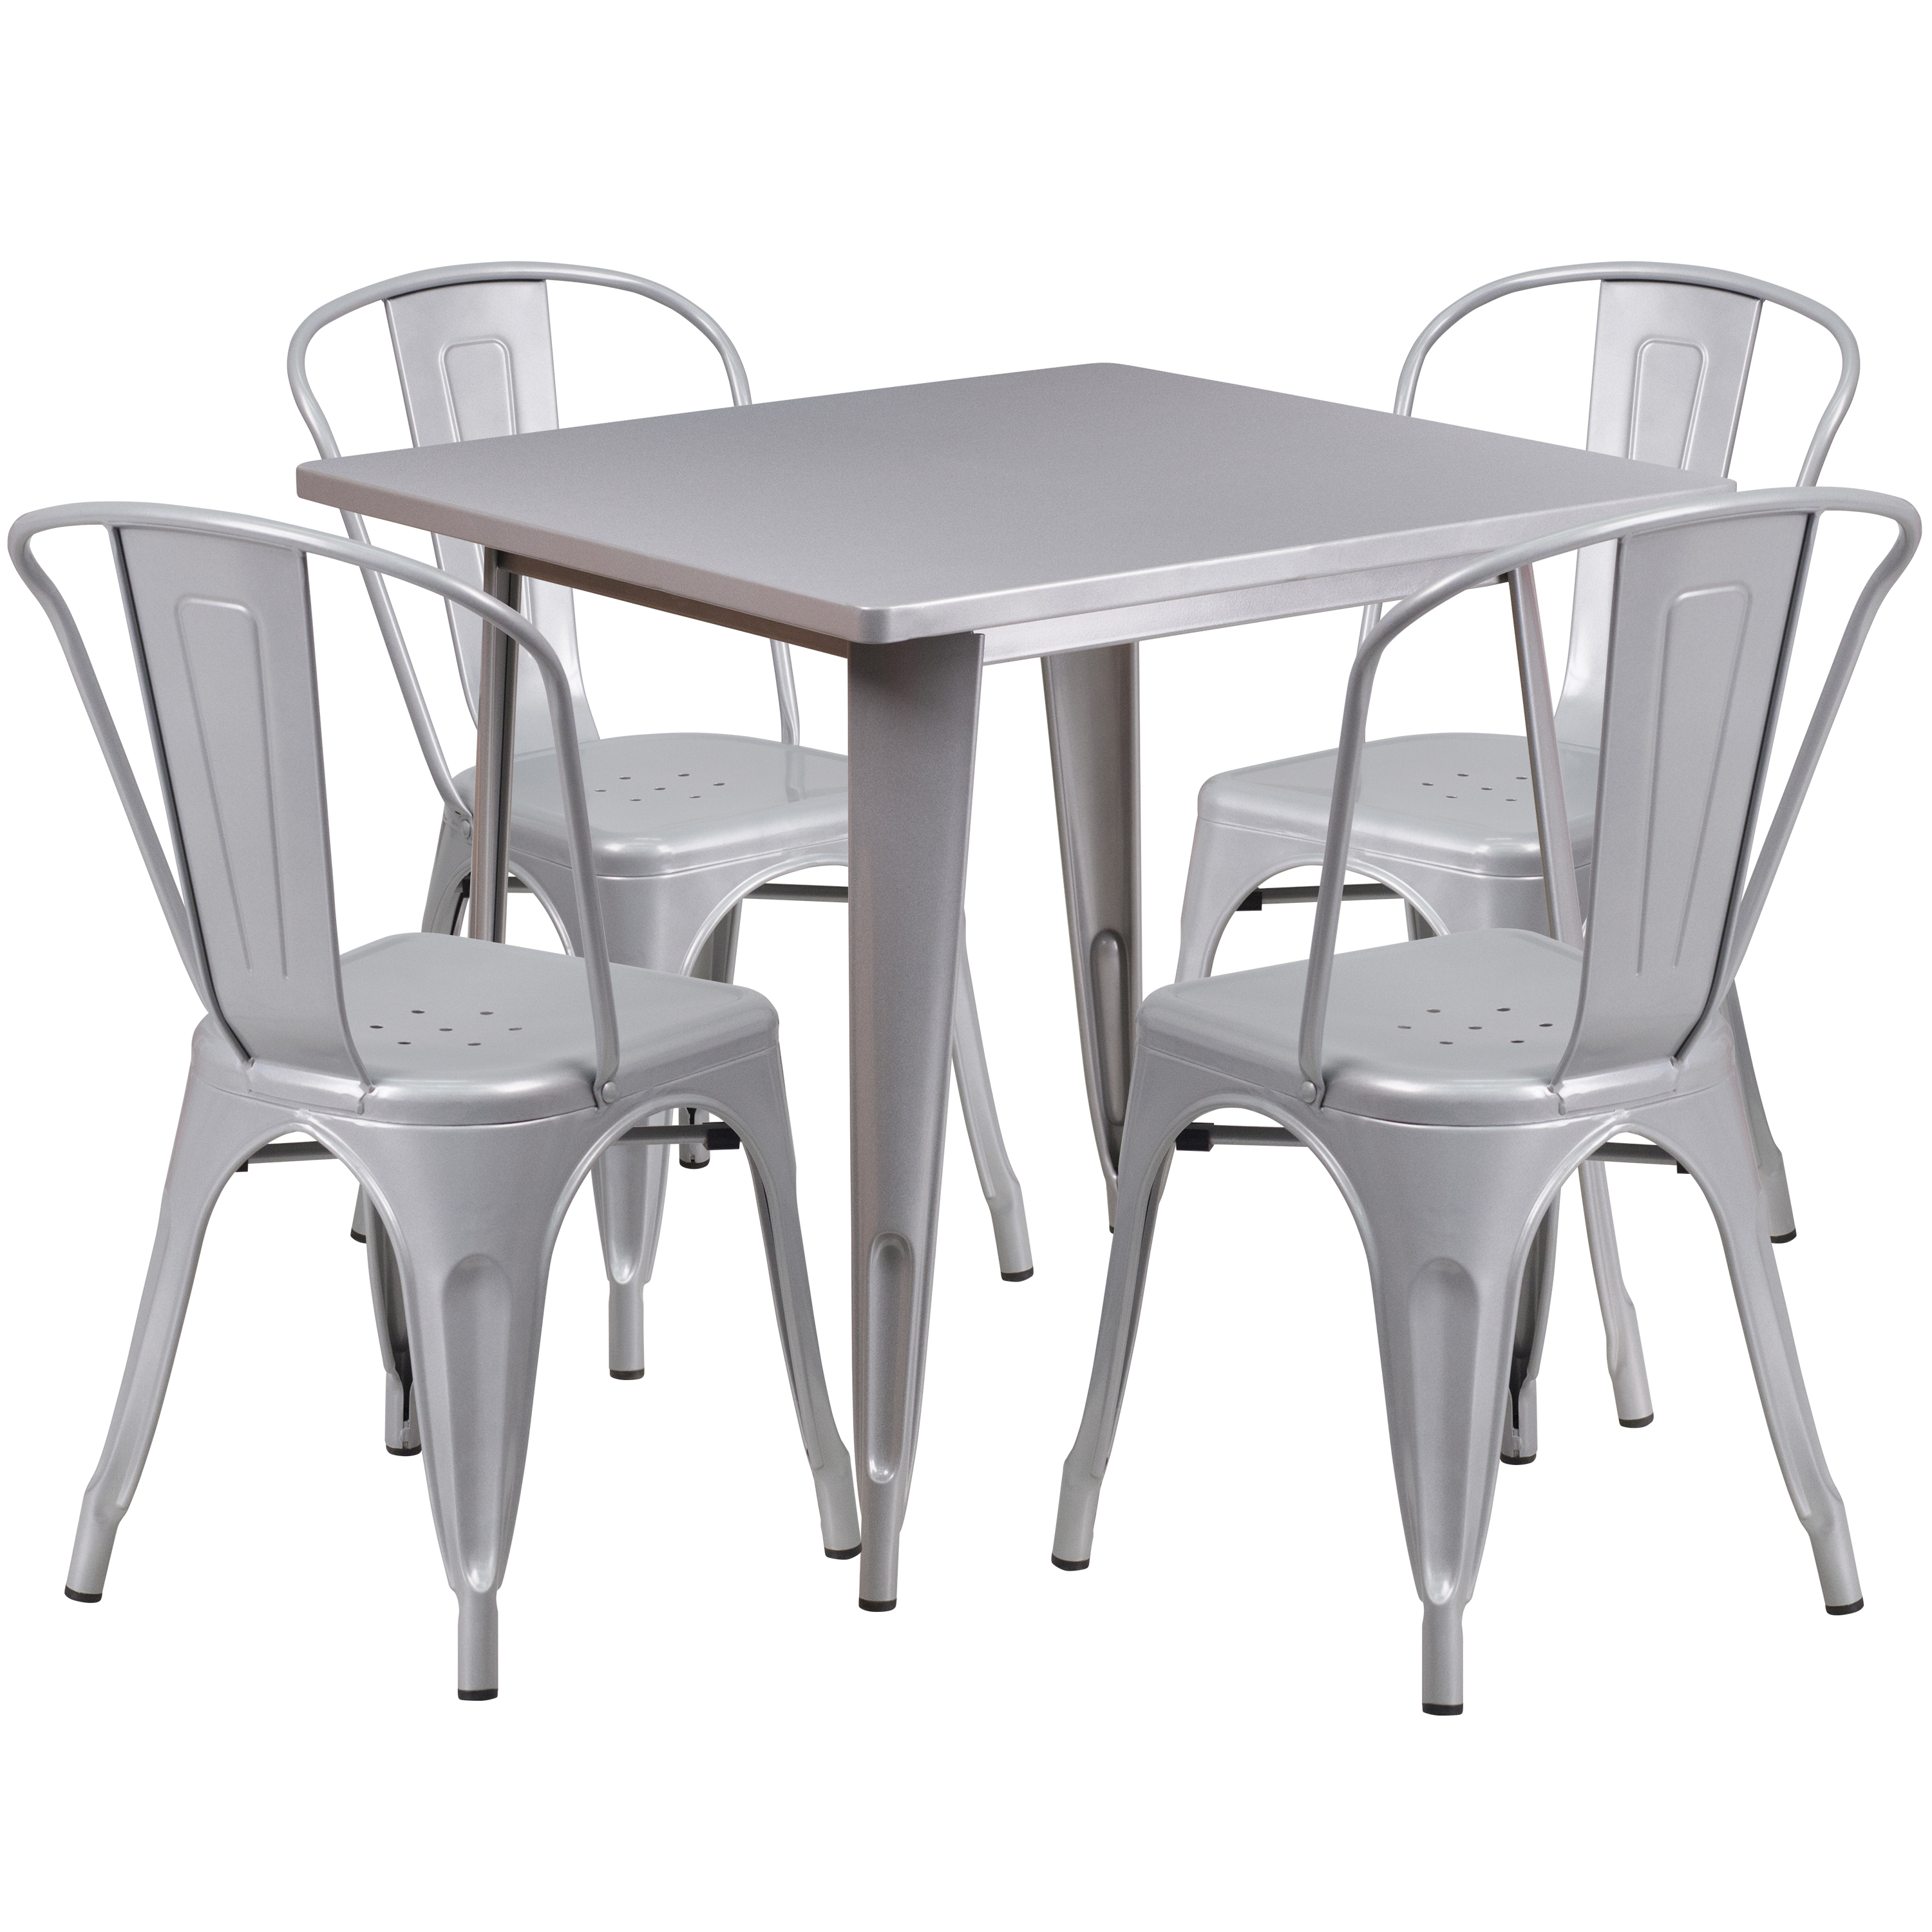 Flash Furniture Commercial Grade 31.5" Square Silver Metal Indoor-Outdoor Table Set with 4 Stack Chairs - image 1 of 2